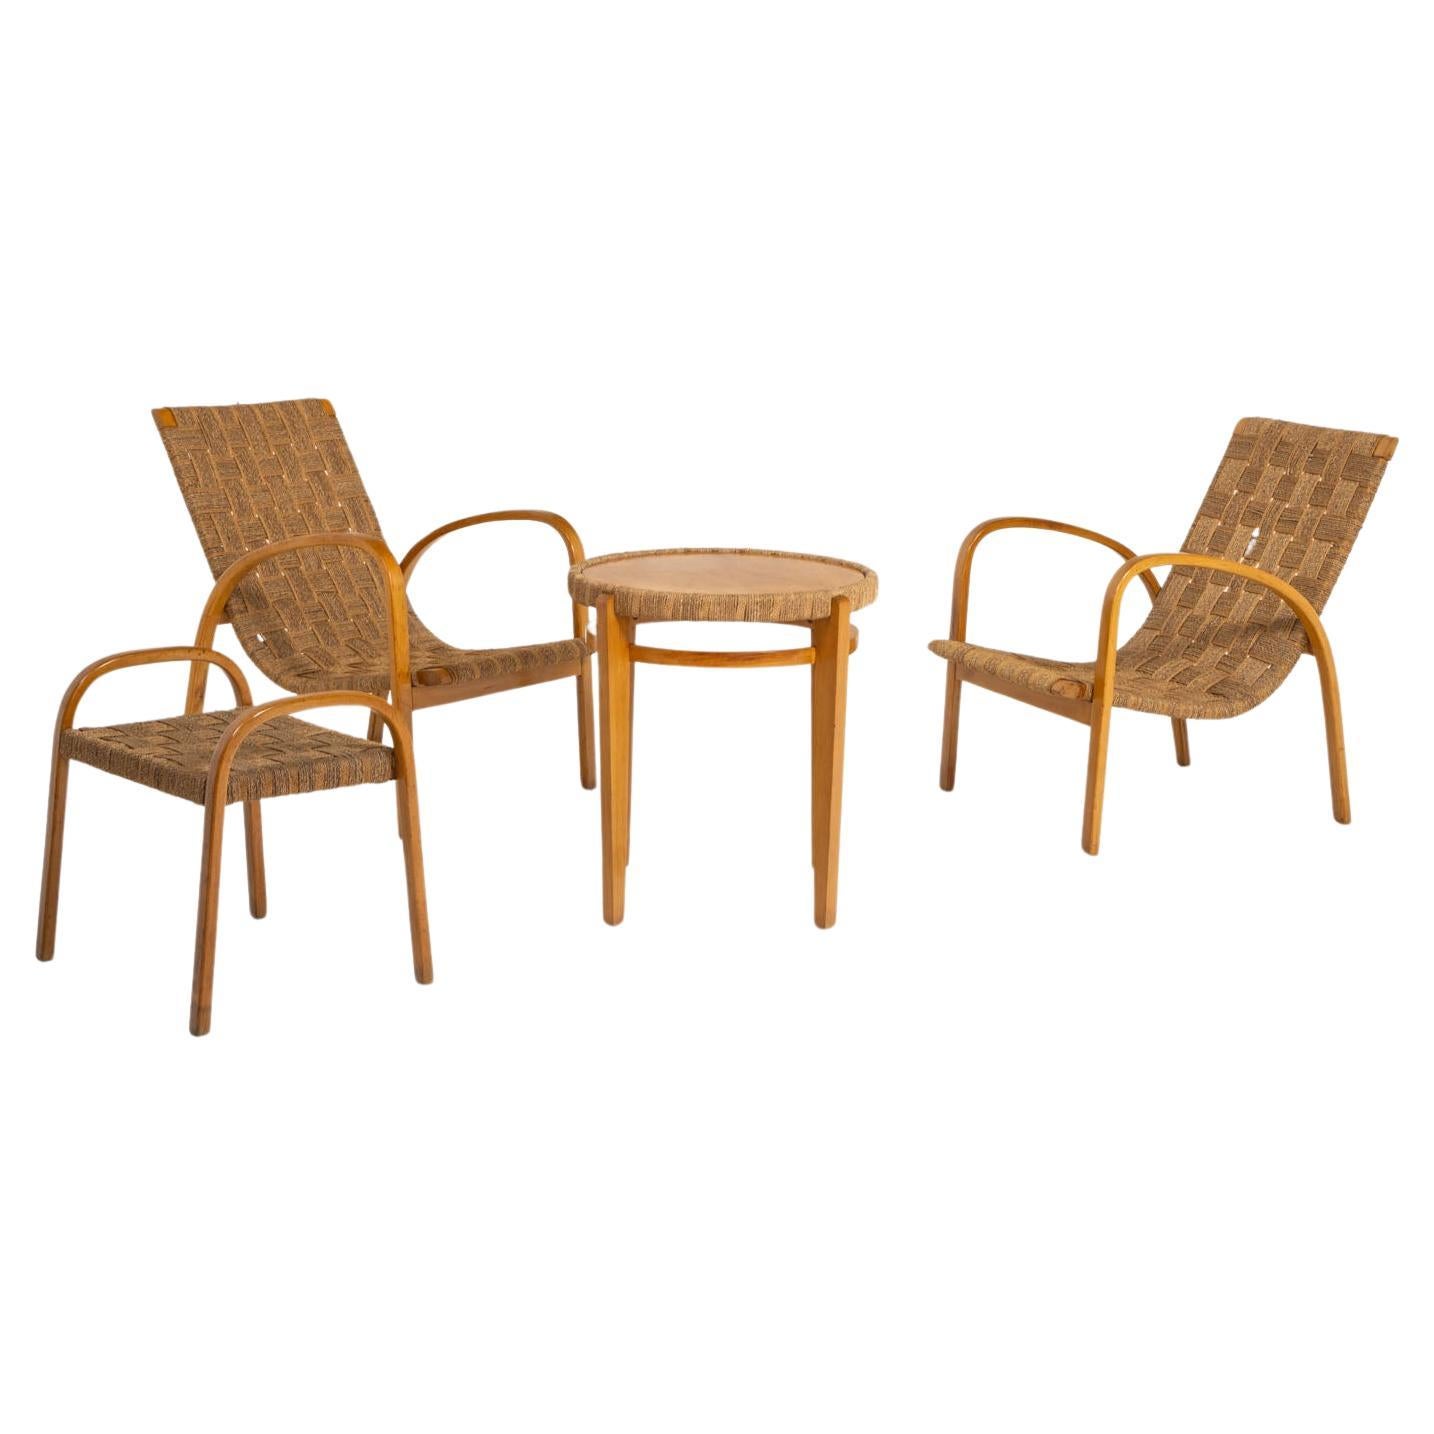 Seating group with rope covering, Italy 1940s For Sale